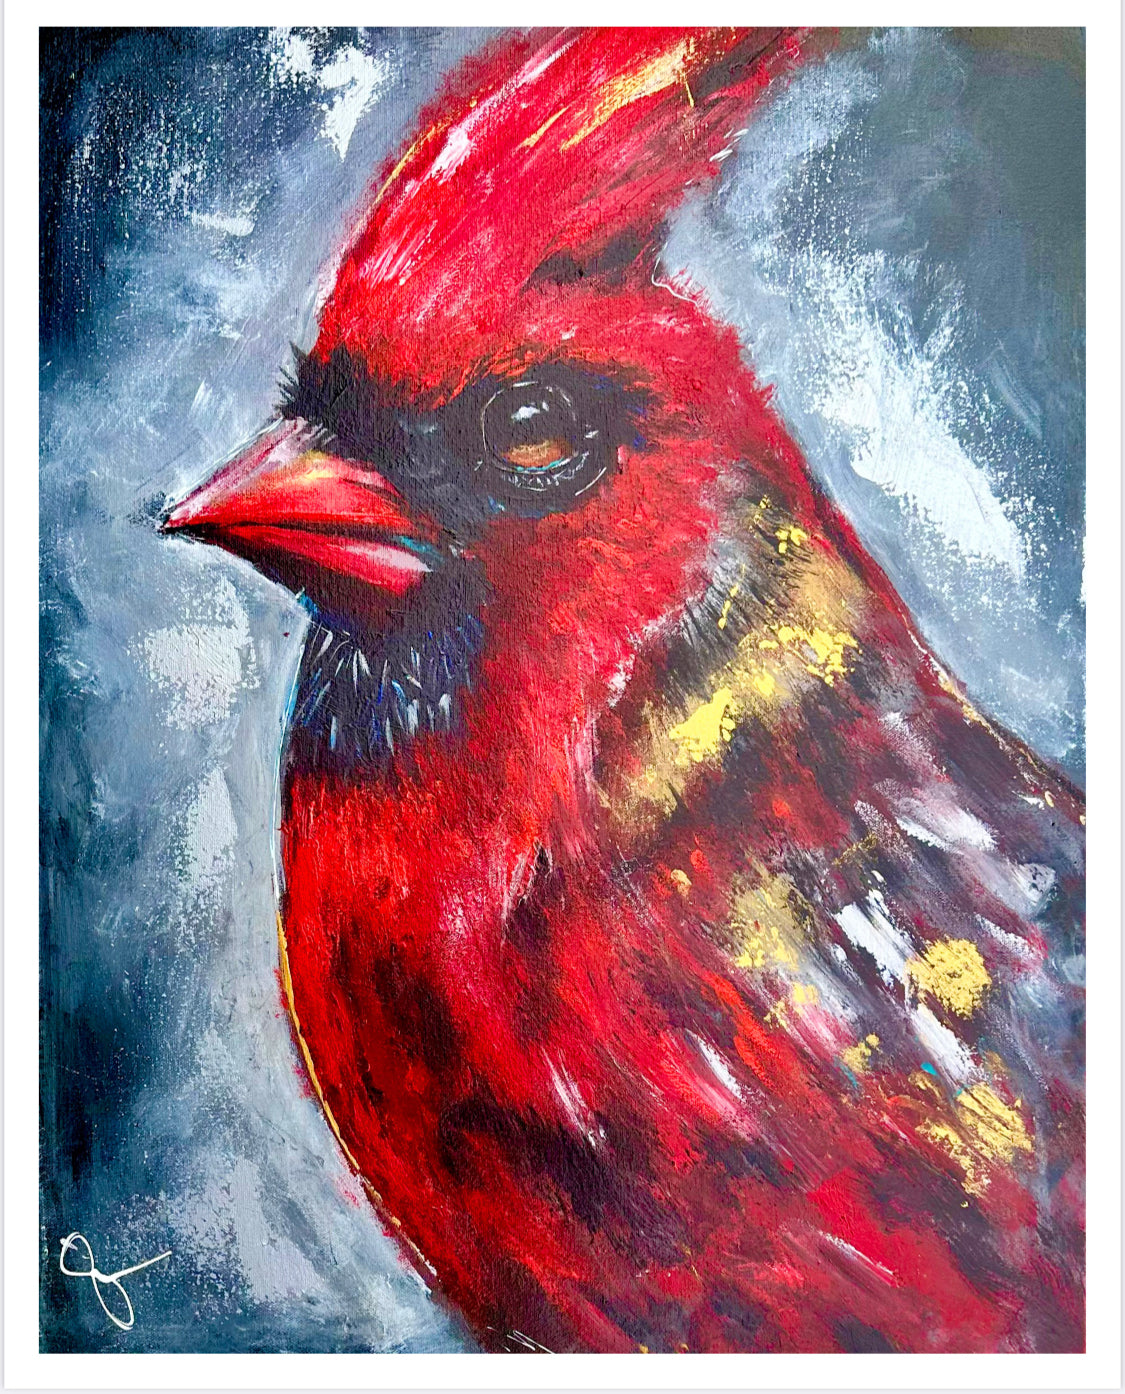 16x20 Vibrant Print: Cardinal Remembering Love is What Matters Most